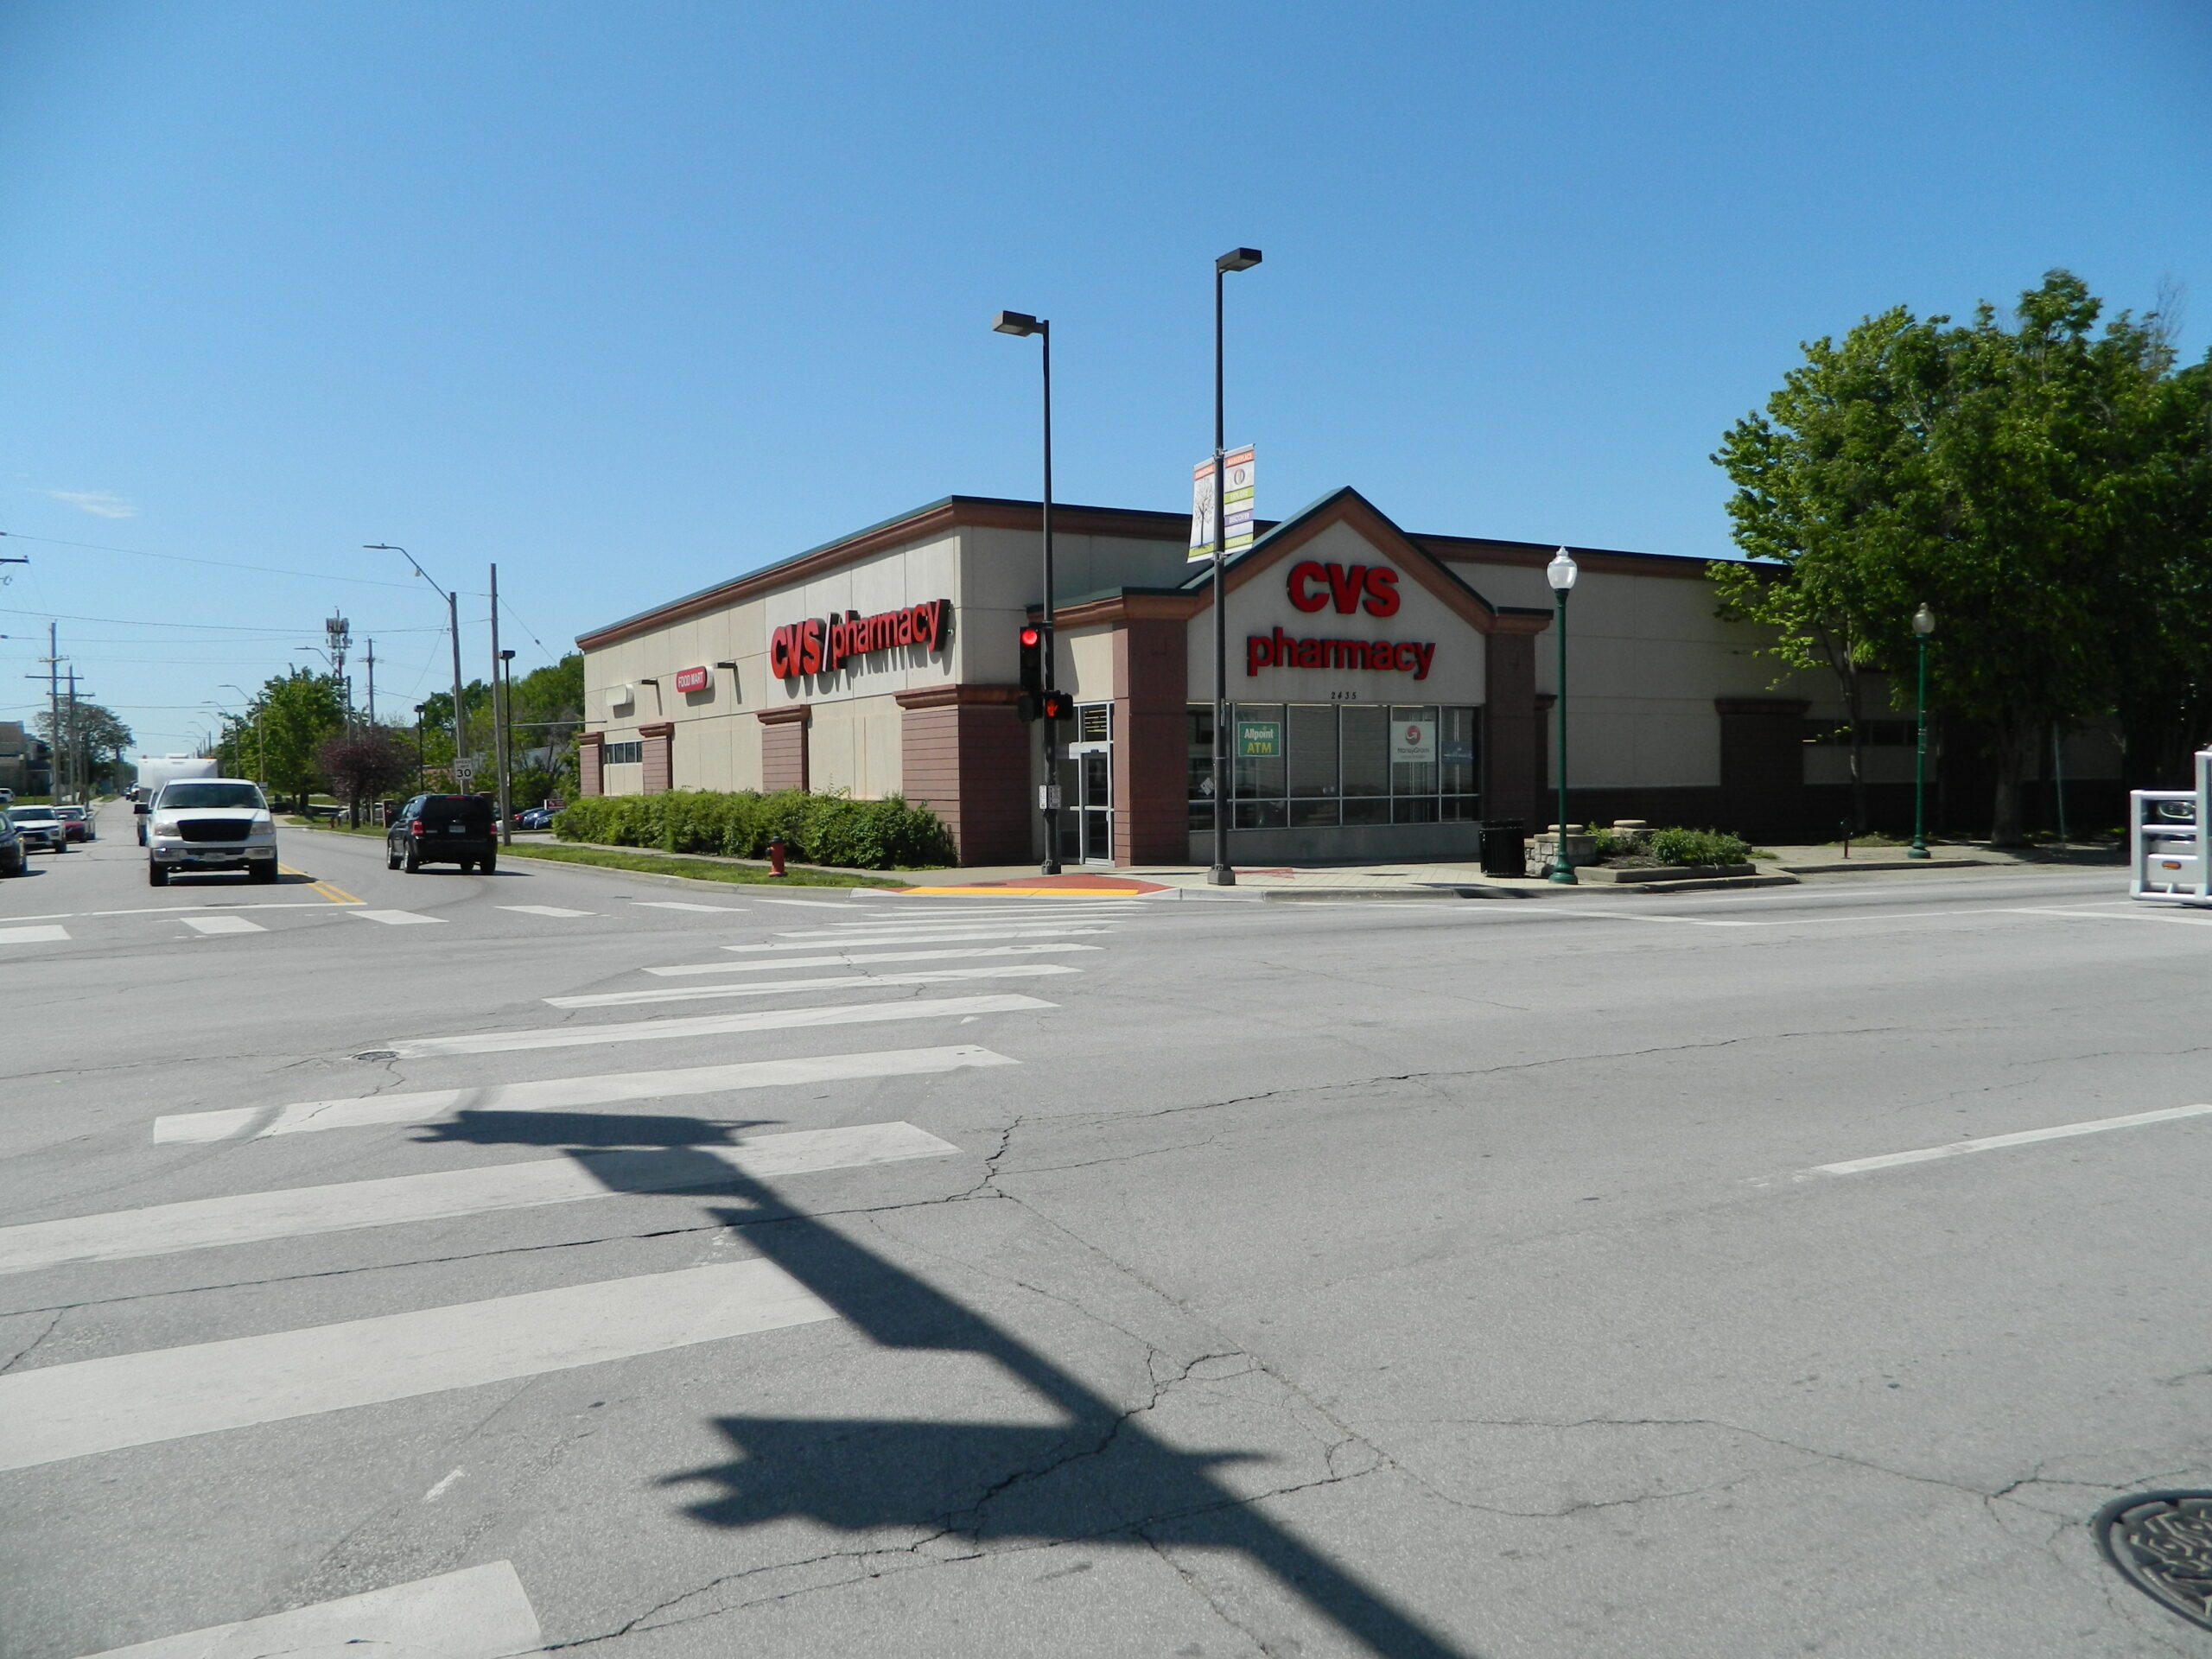 CVS Abandons the Avenue: Theft and Rent cited as primary reasons for closure